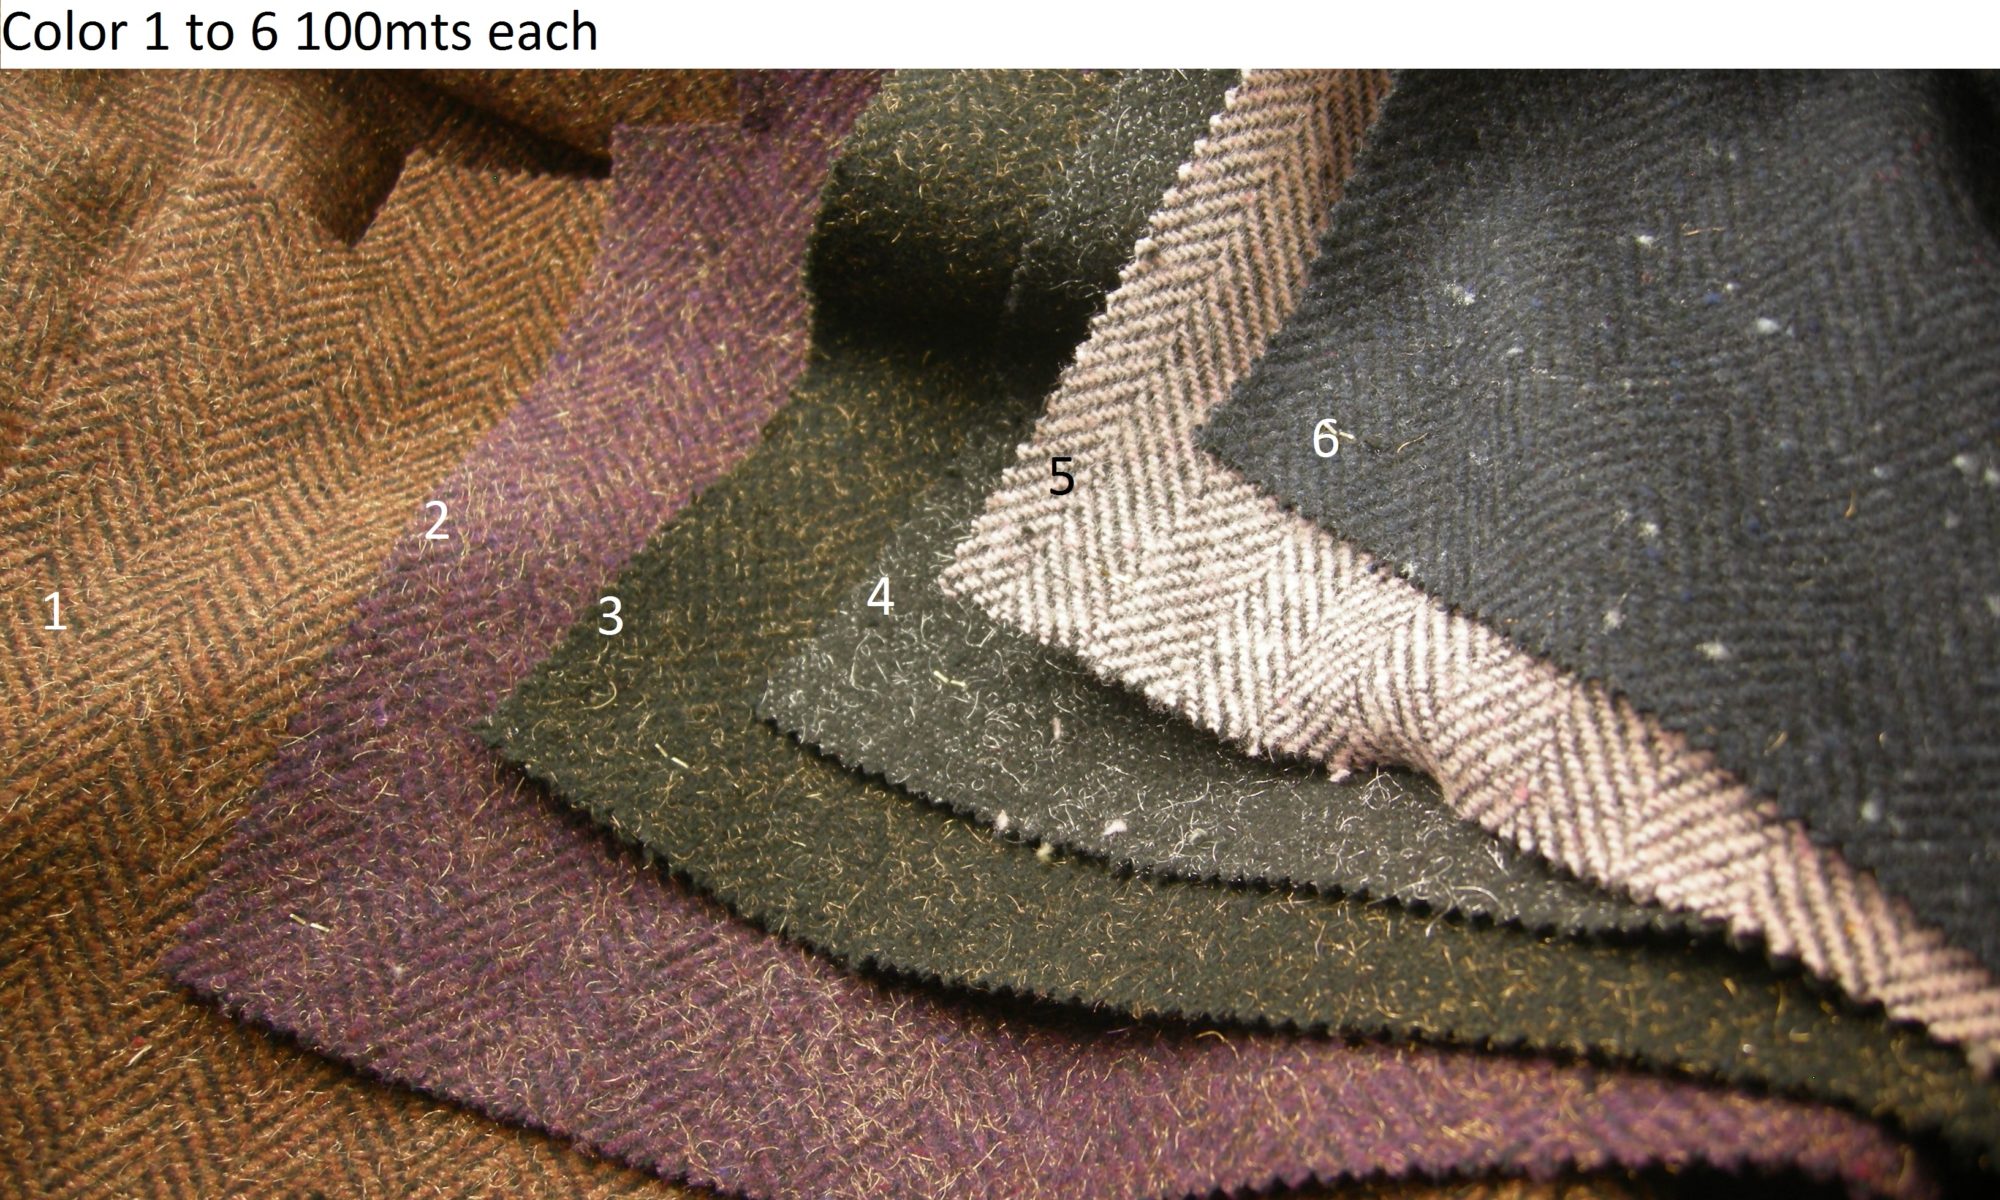 ART 7074 FTA shiny wool blend herringbone jacket fabric WIDTH cm150 WEIGHT gr380 COMPOSITION 30 wool 30 acrylic 20 polyester 15 polyammide 5 others - Color 1 to 6 100mts each